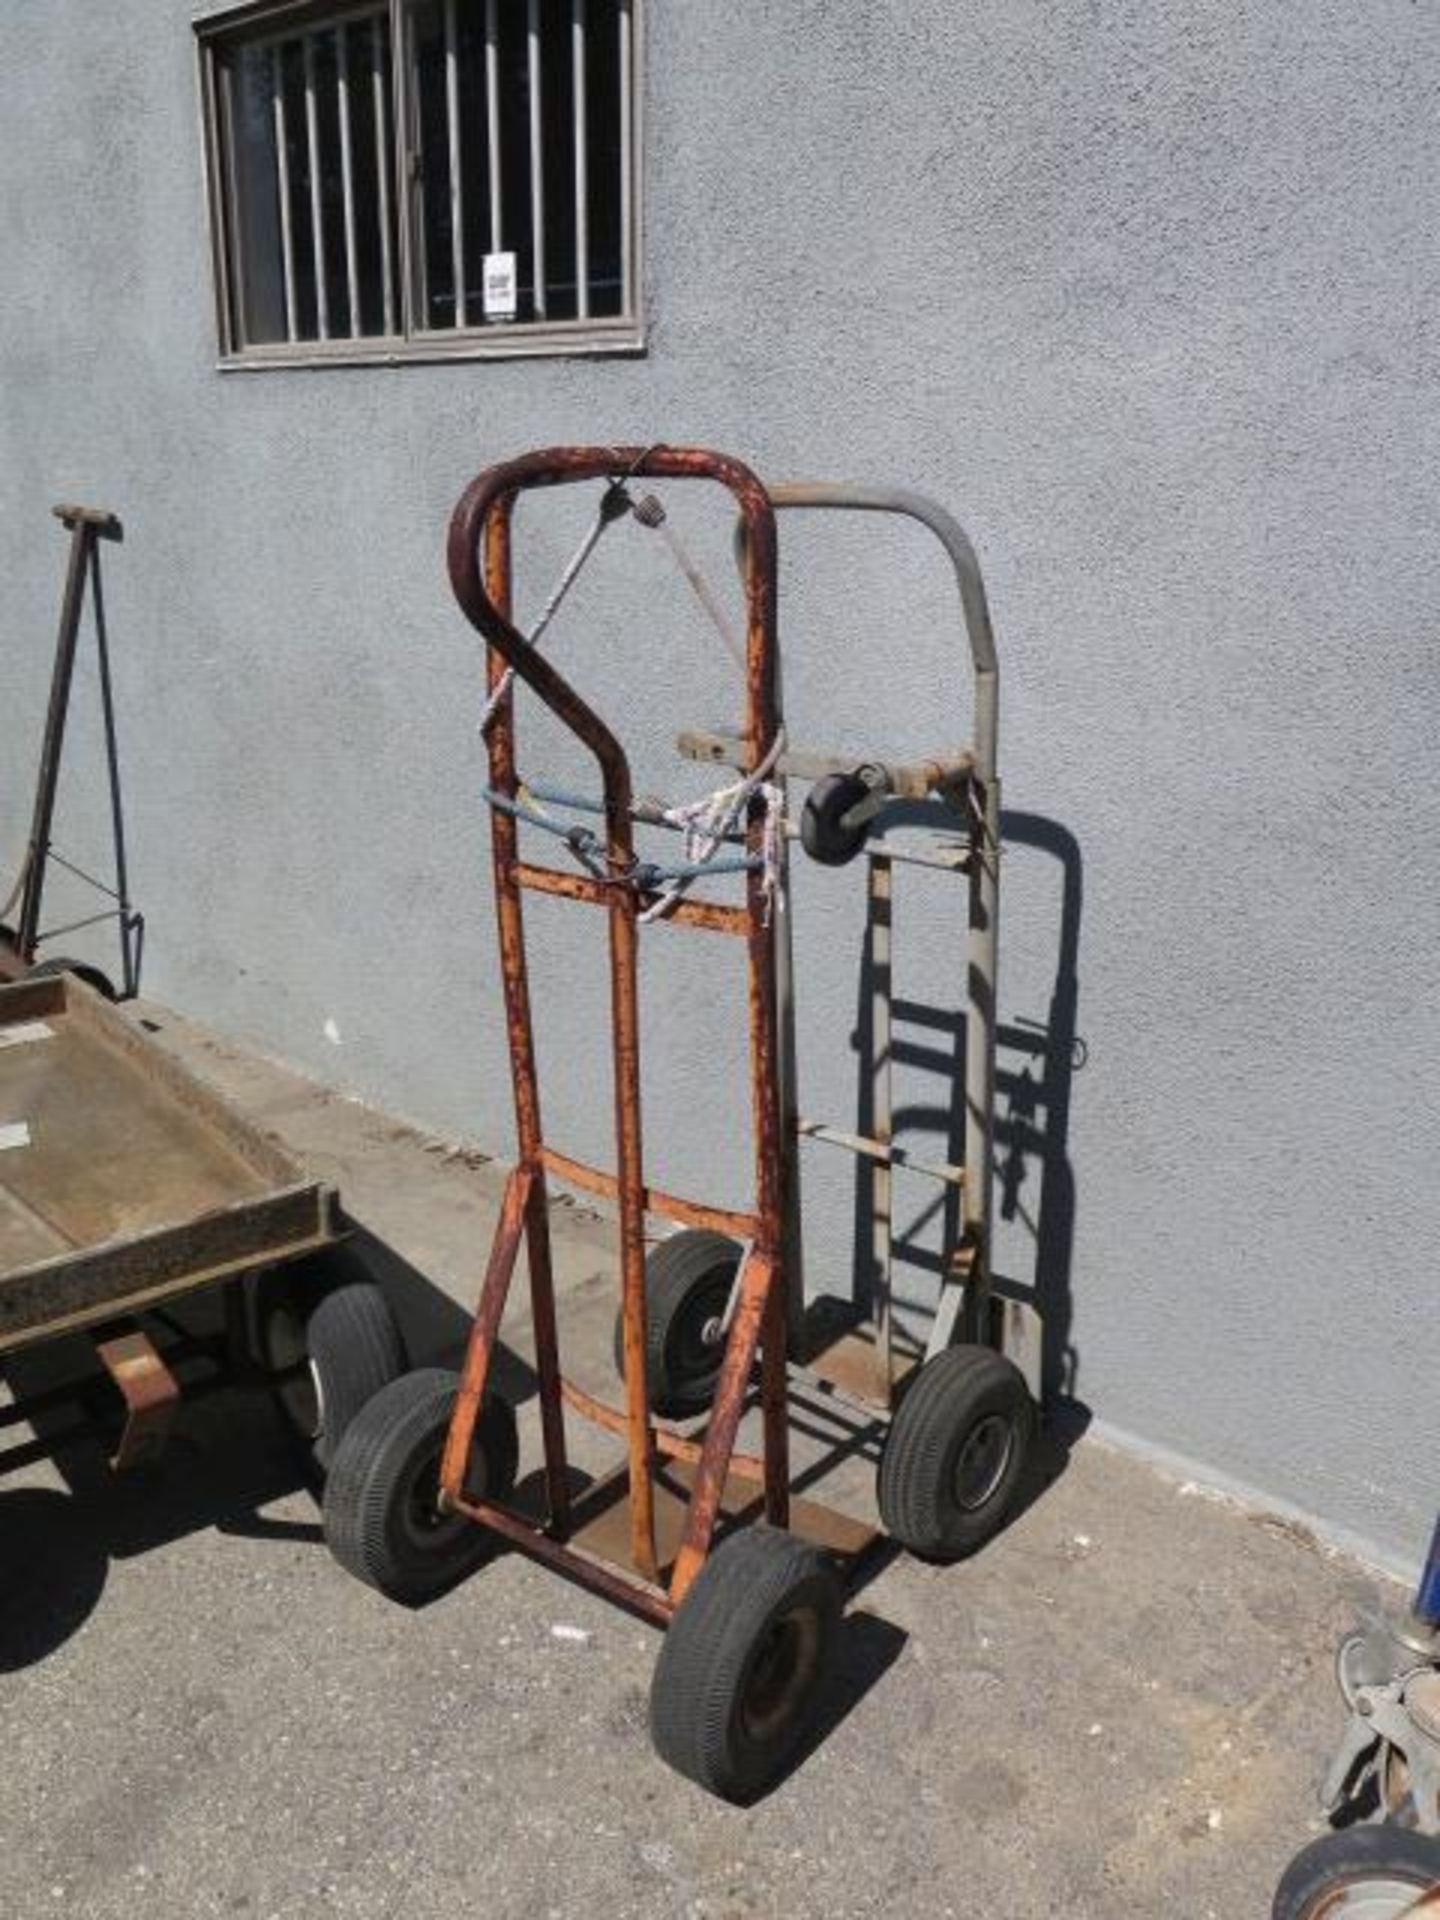 Shop Carts, Hand Dolleys and Wheel Barrow (SOLD AS-IS - NO WARRANTY) - Image 3 of 6